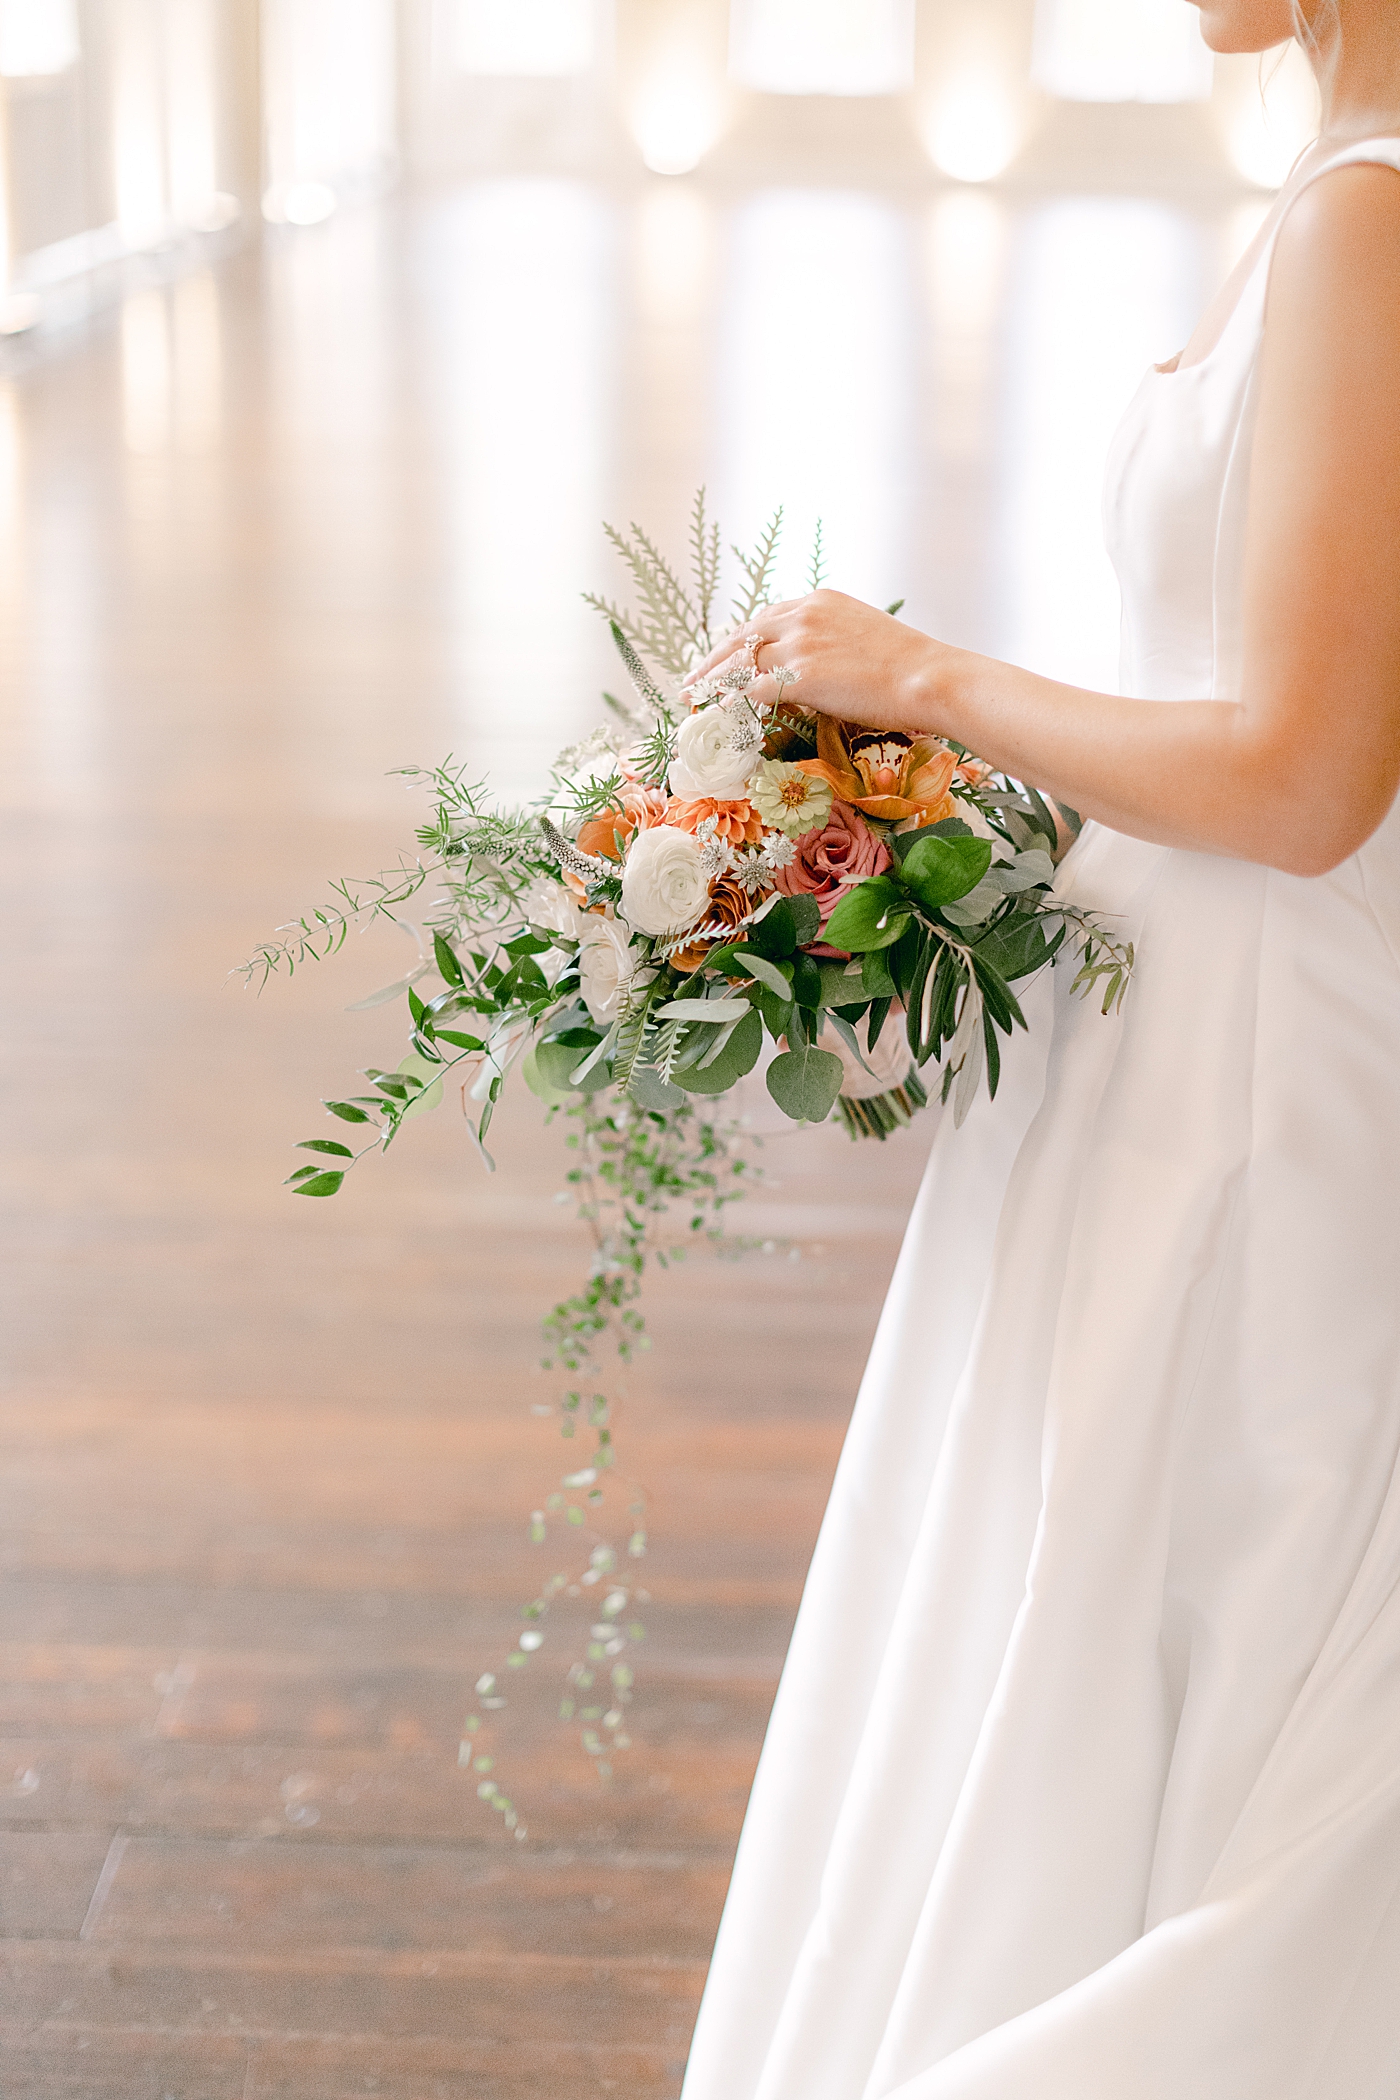 Bride adjusting flowers in her bouquet | Photo by Hope Helmuth Photography